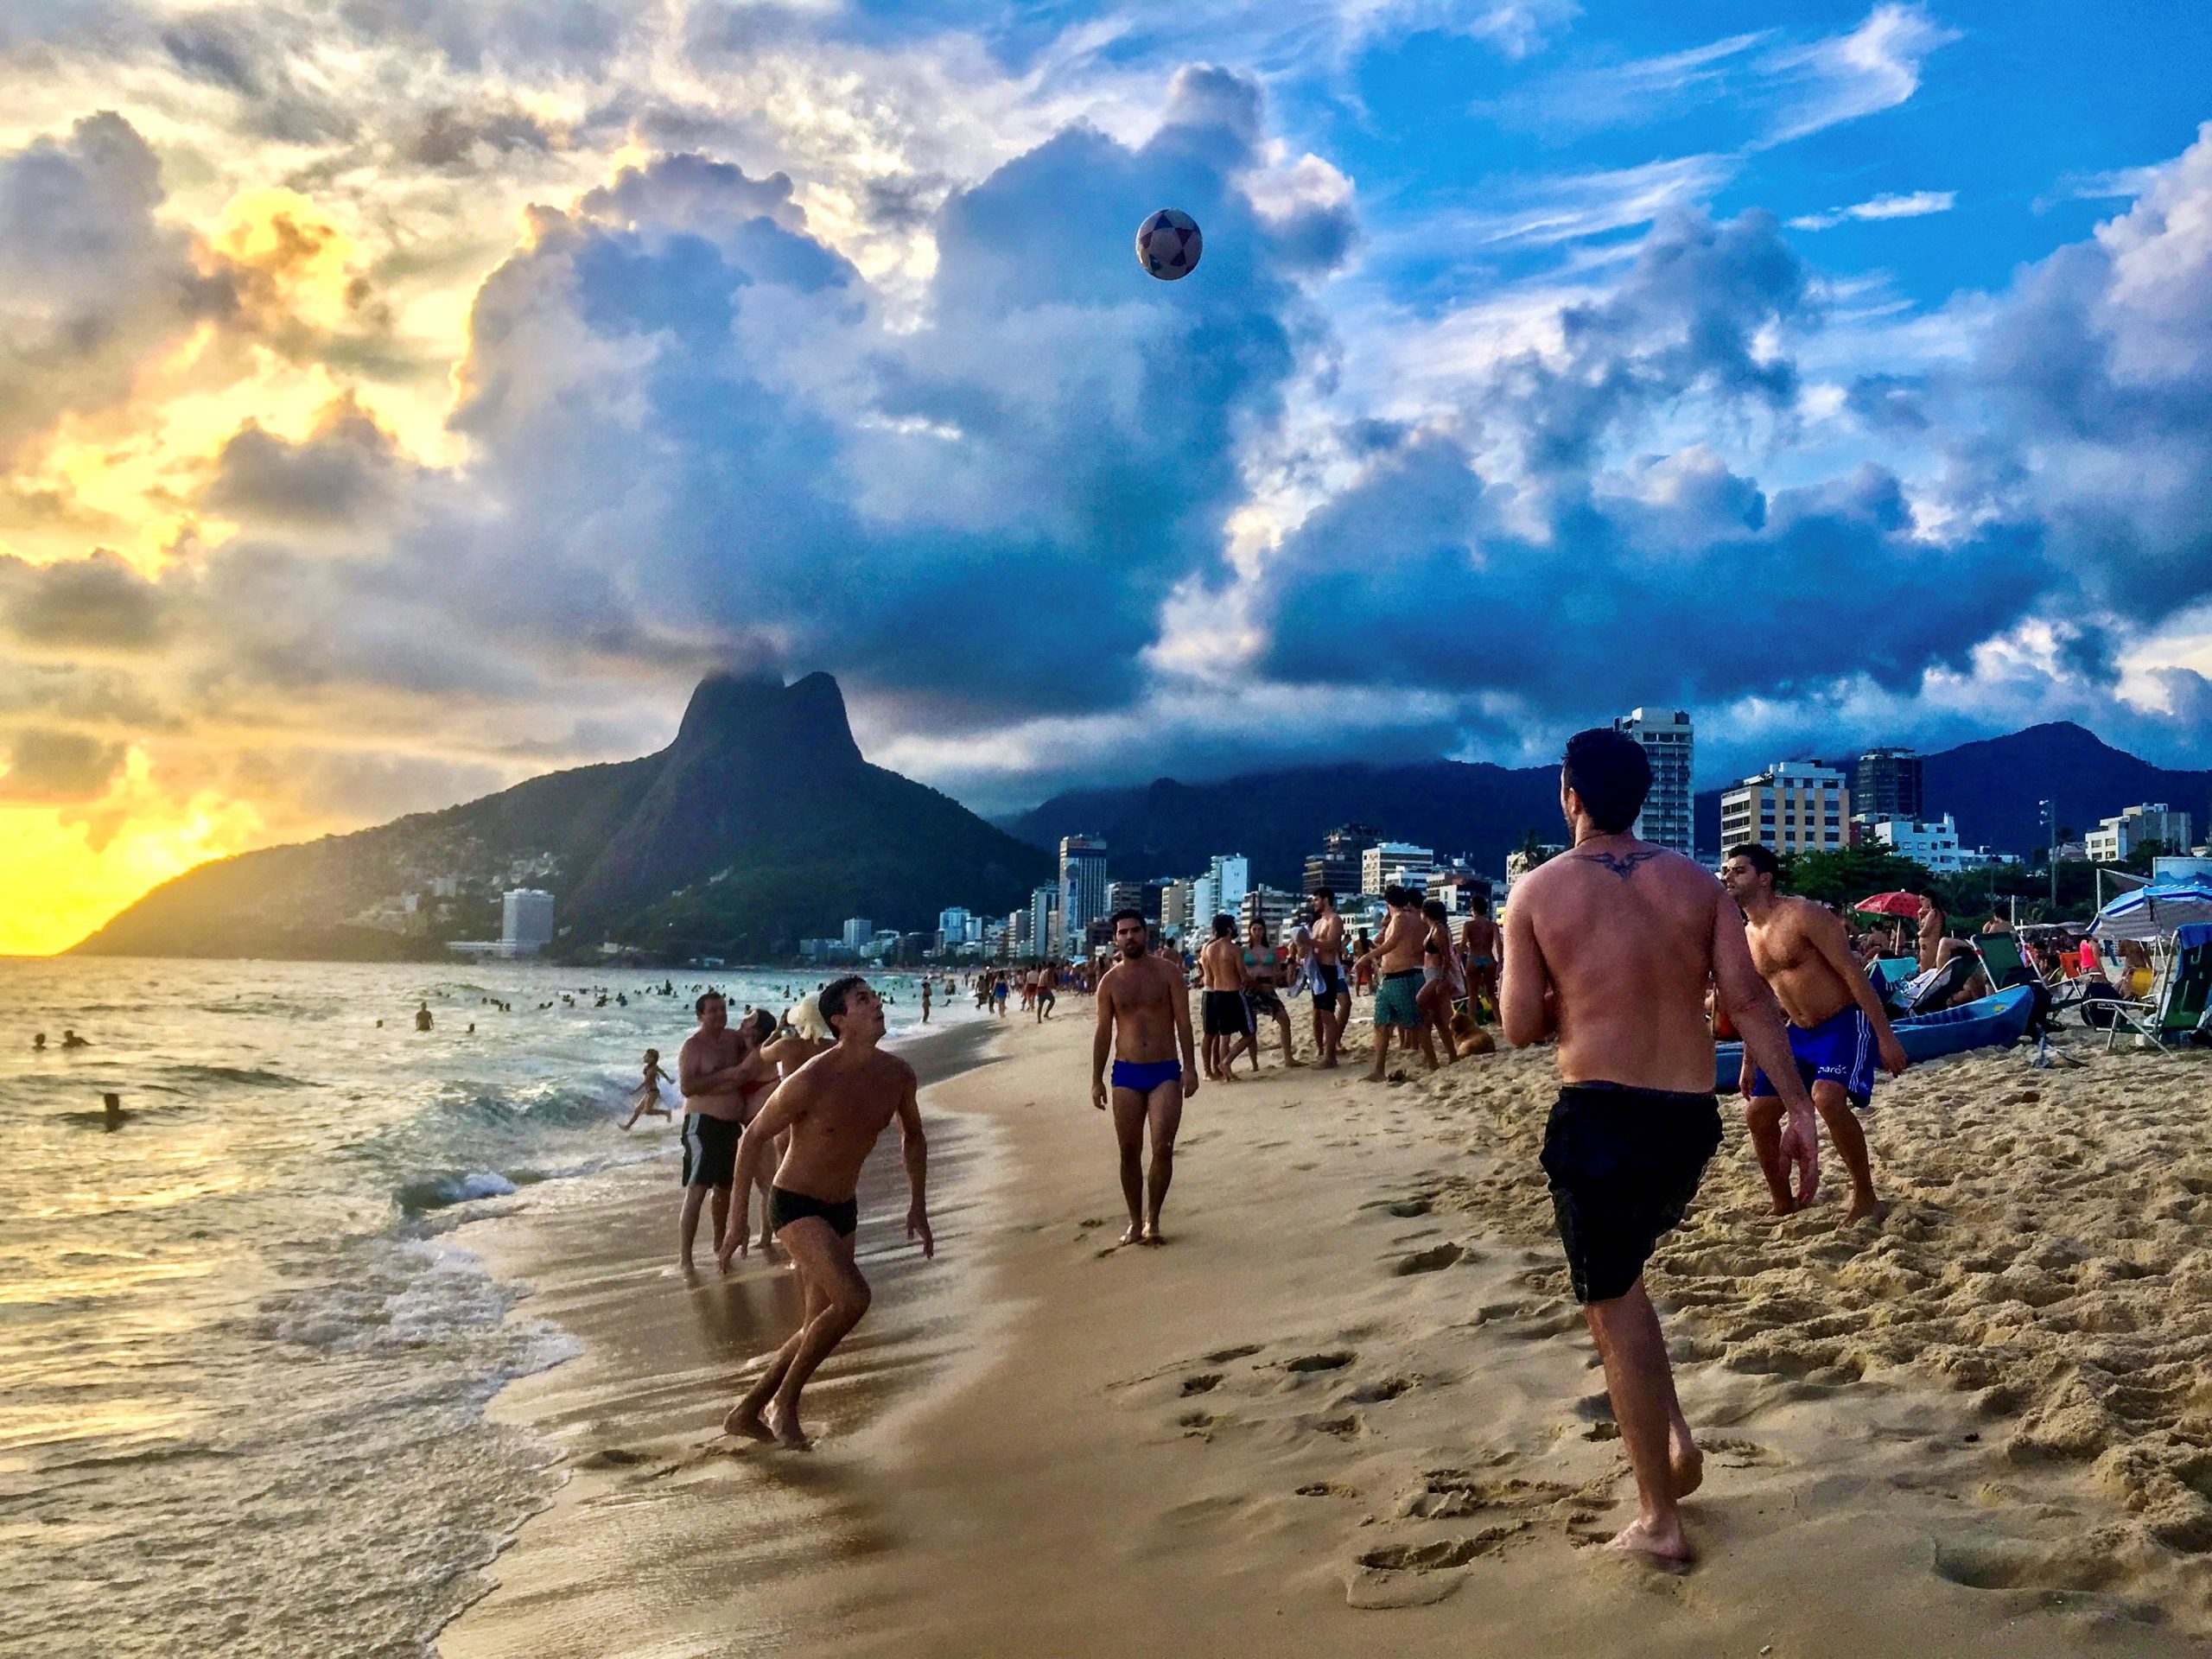 Ipanema Ballers, shot by Lewis